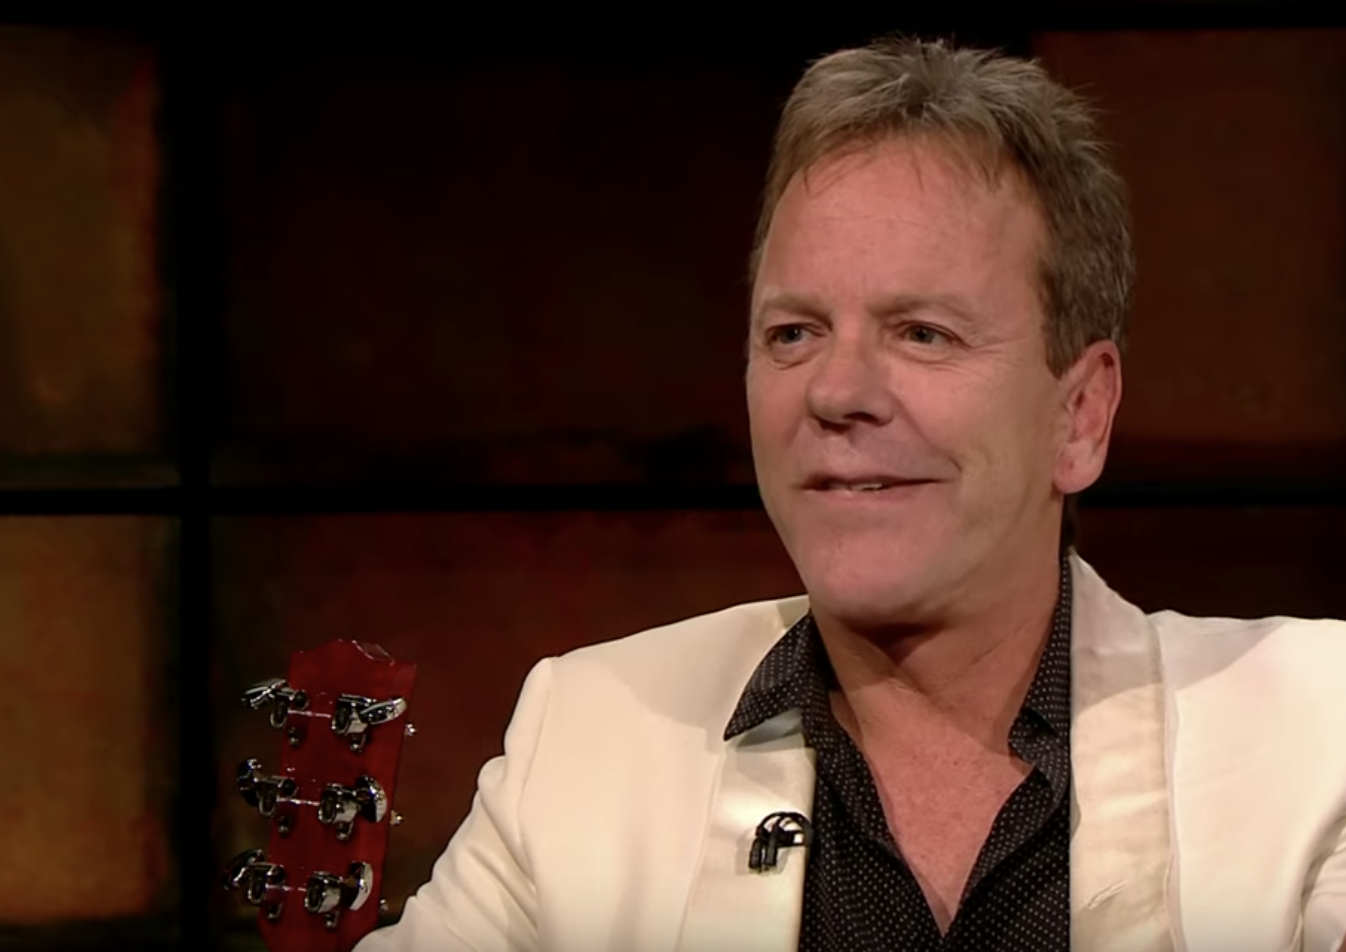 WATCH: Actor Kiefer Sutherland describes a rather bizarre night out in Dublin with Pogues frontman Shane McGowan